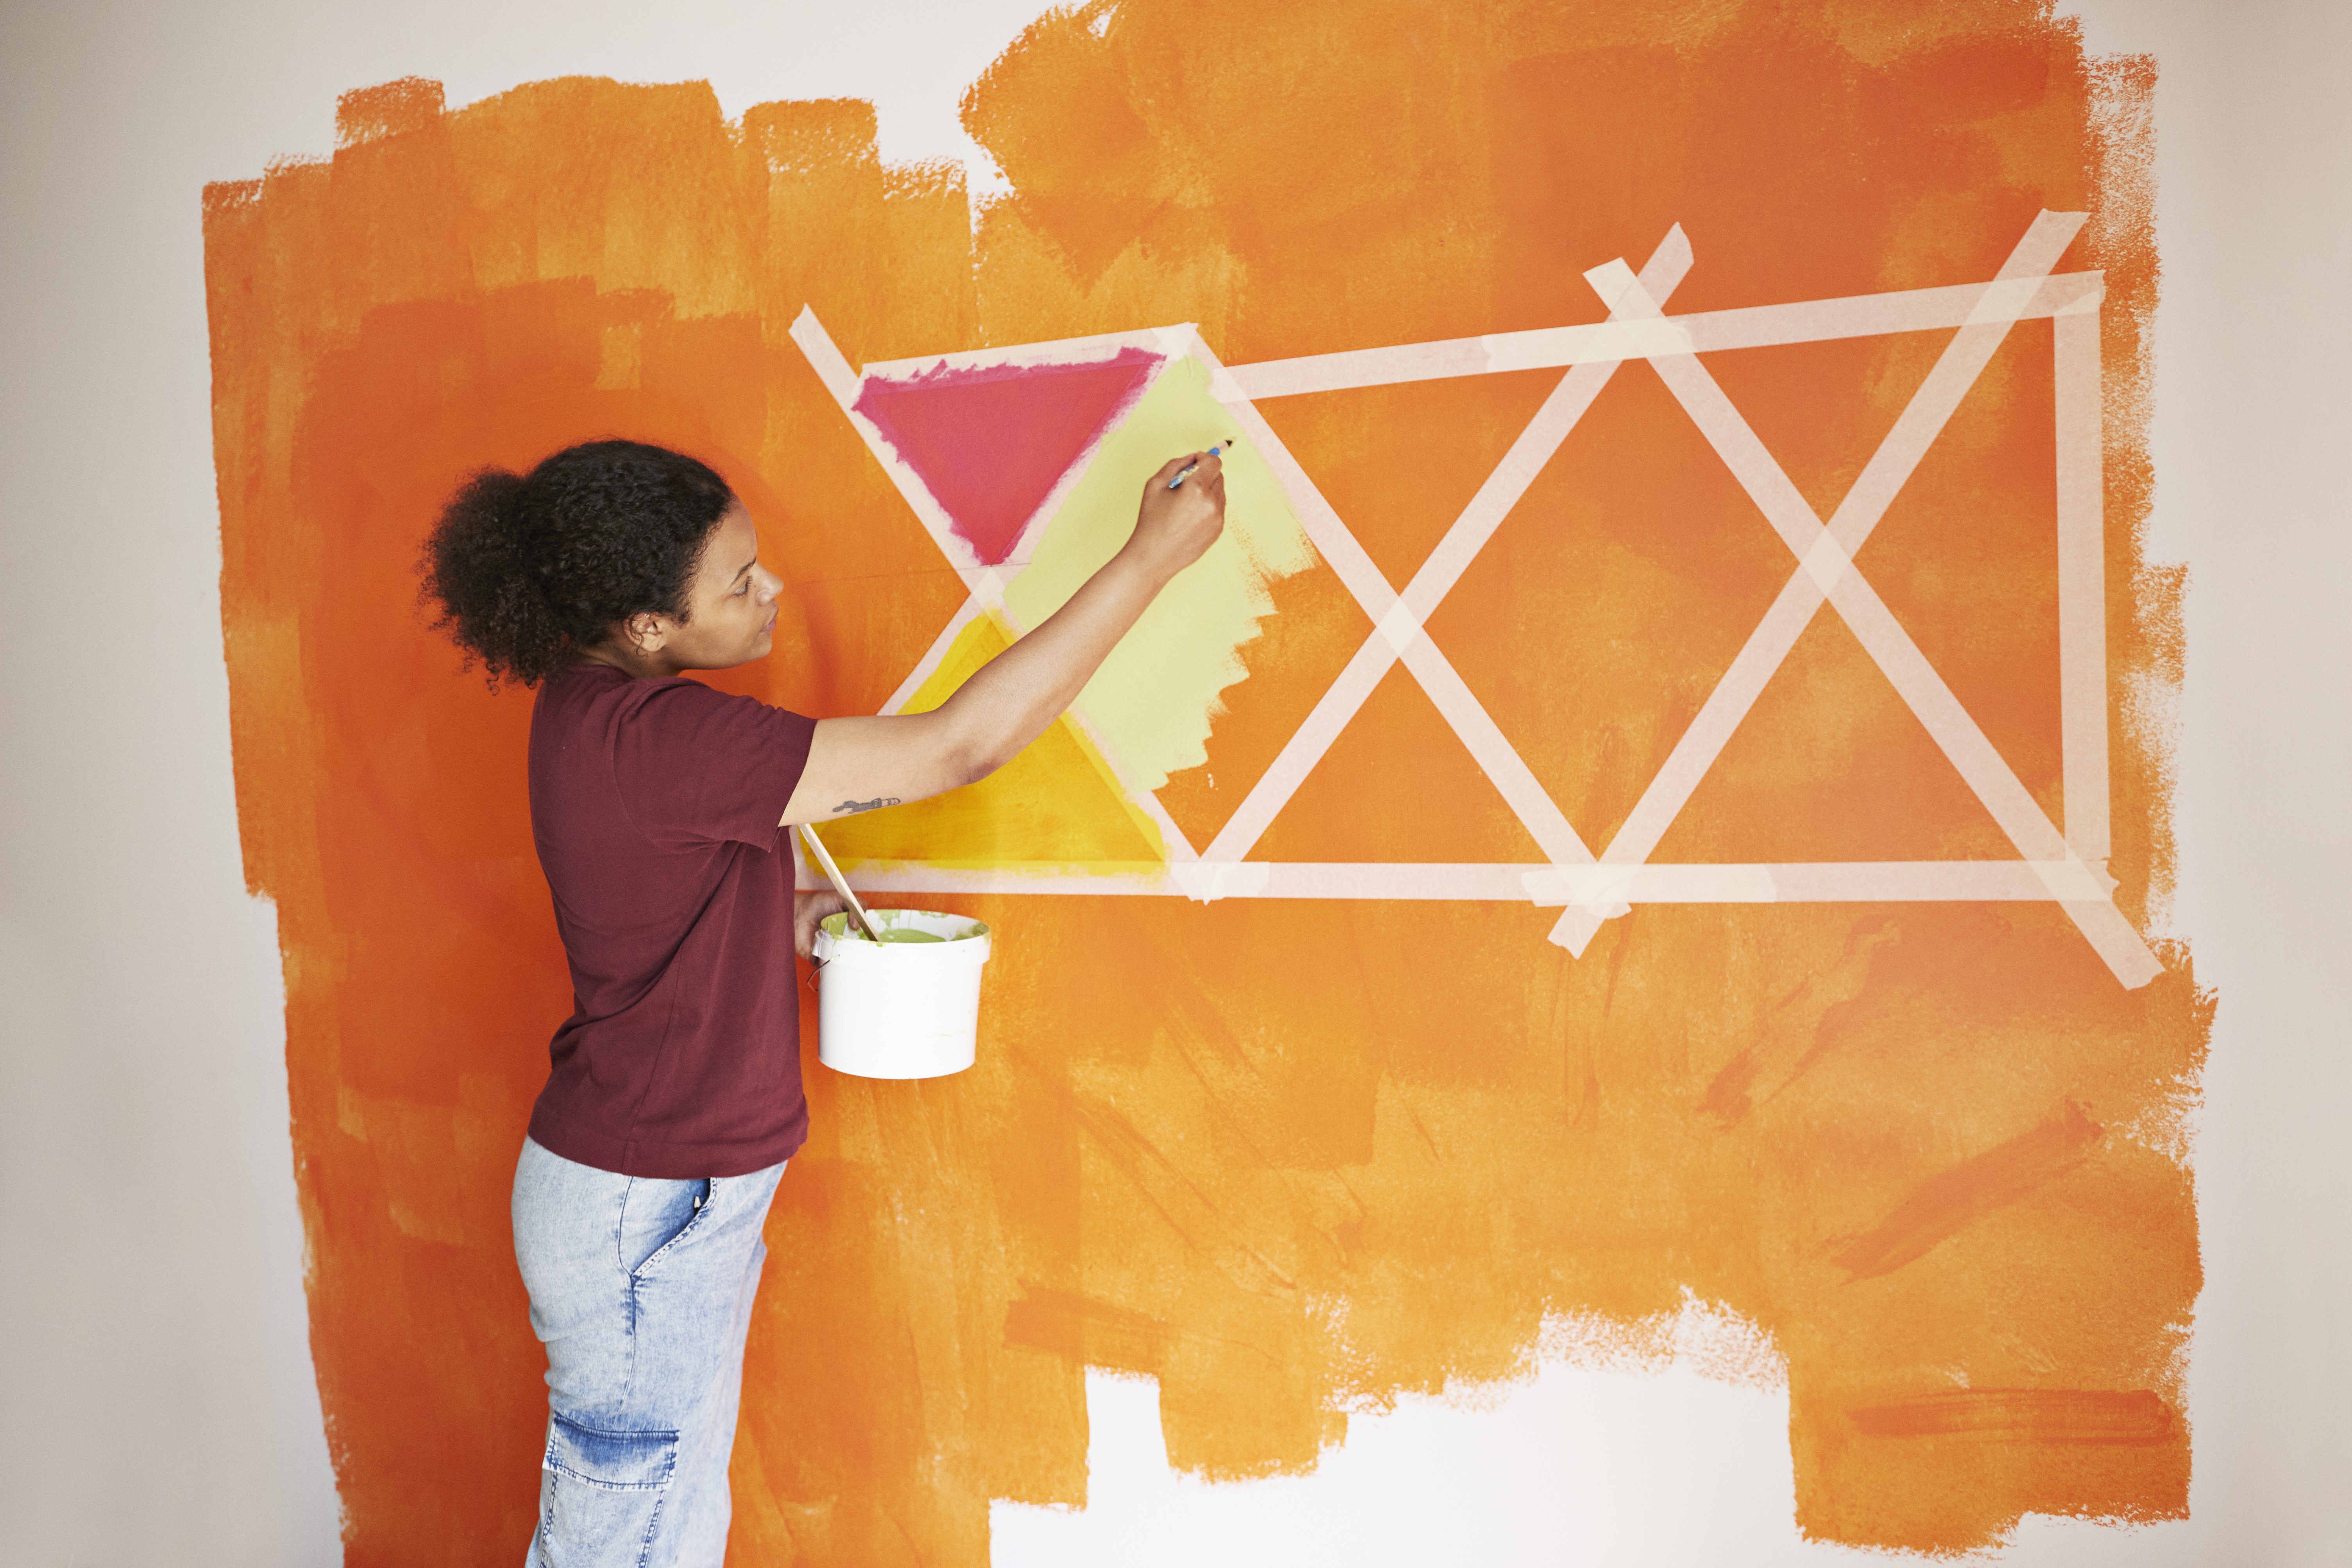 A woman painting her room | Source: Getty Images